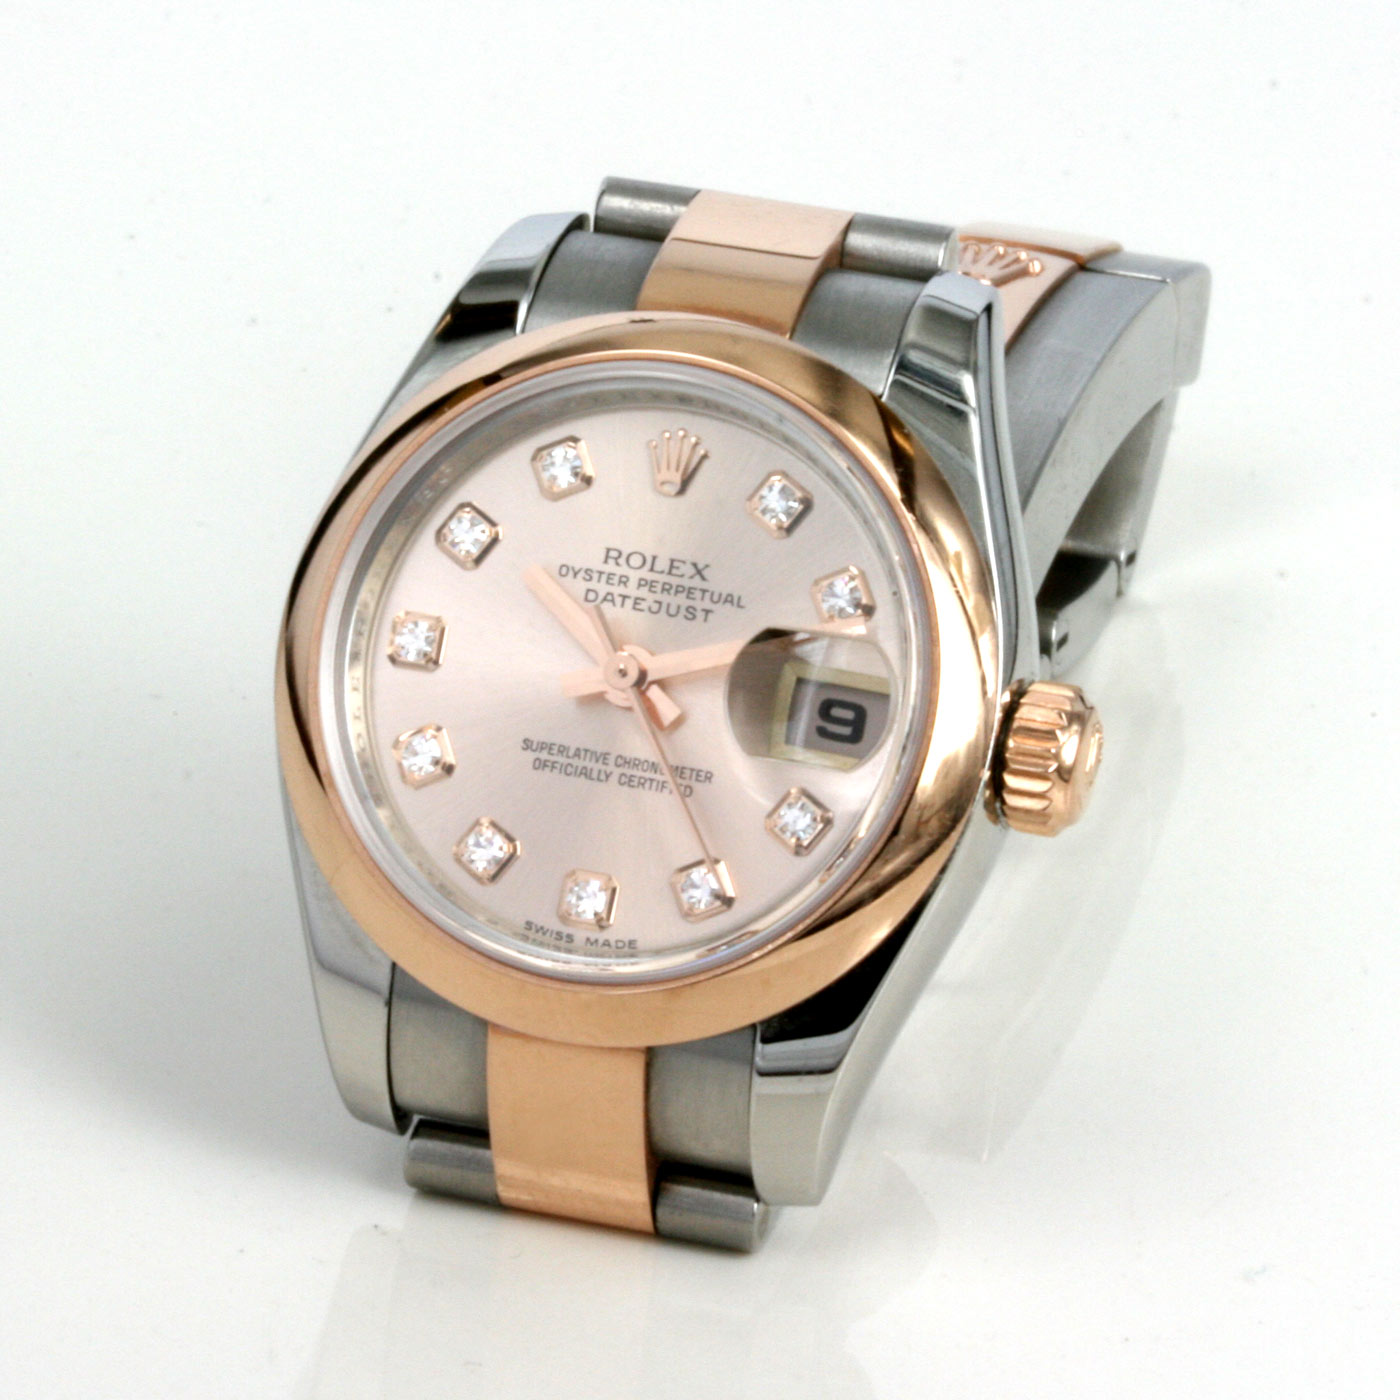 Rolex Oyster Lady Datejust gold and steel.